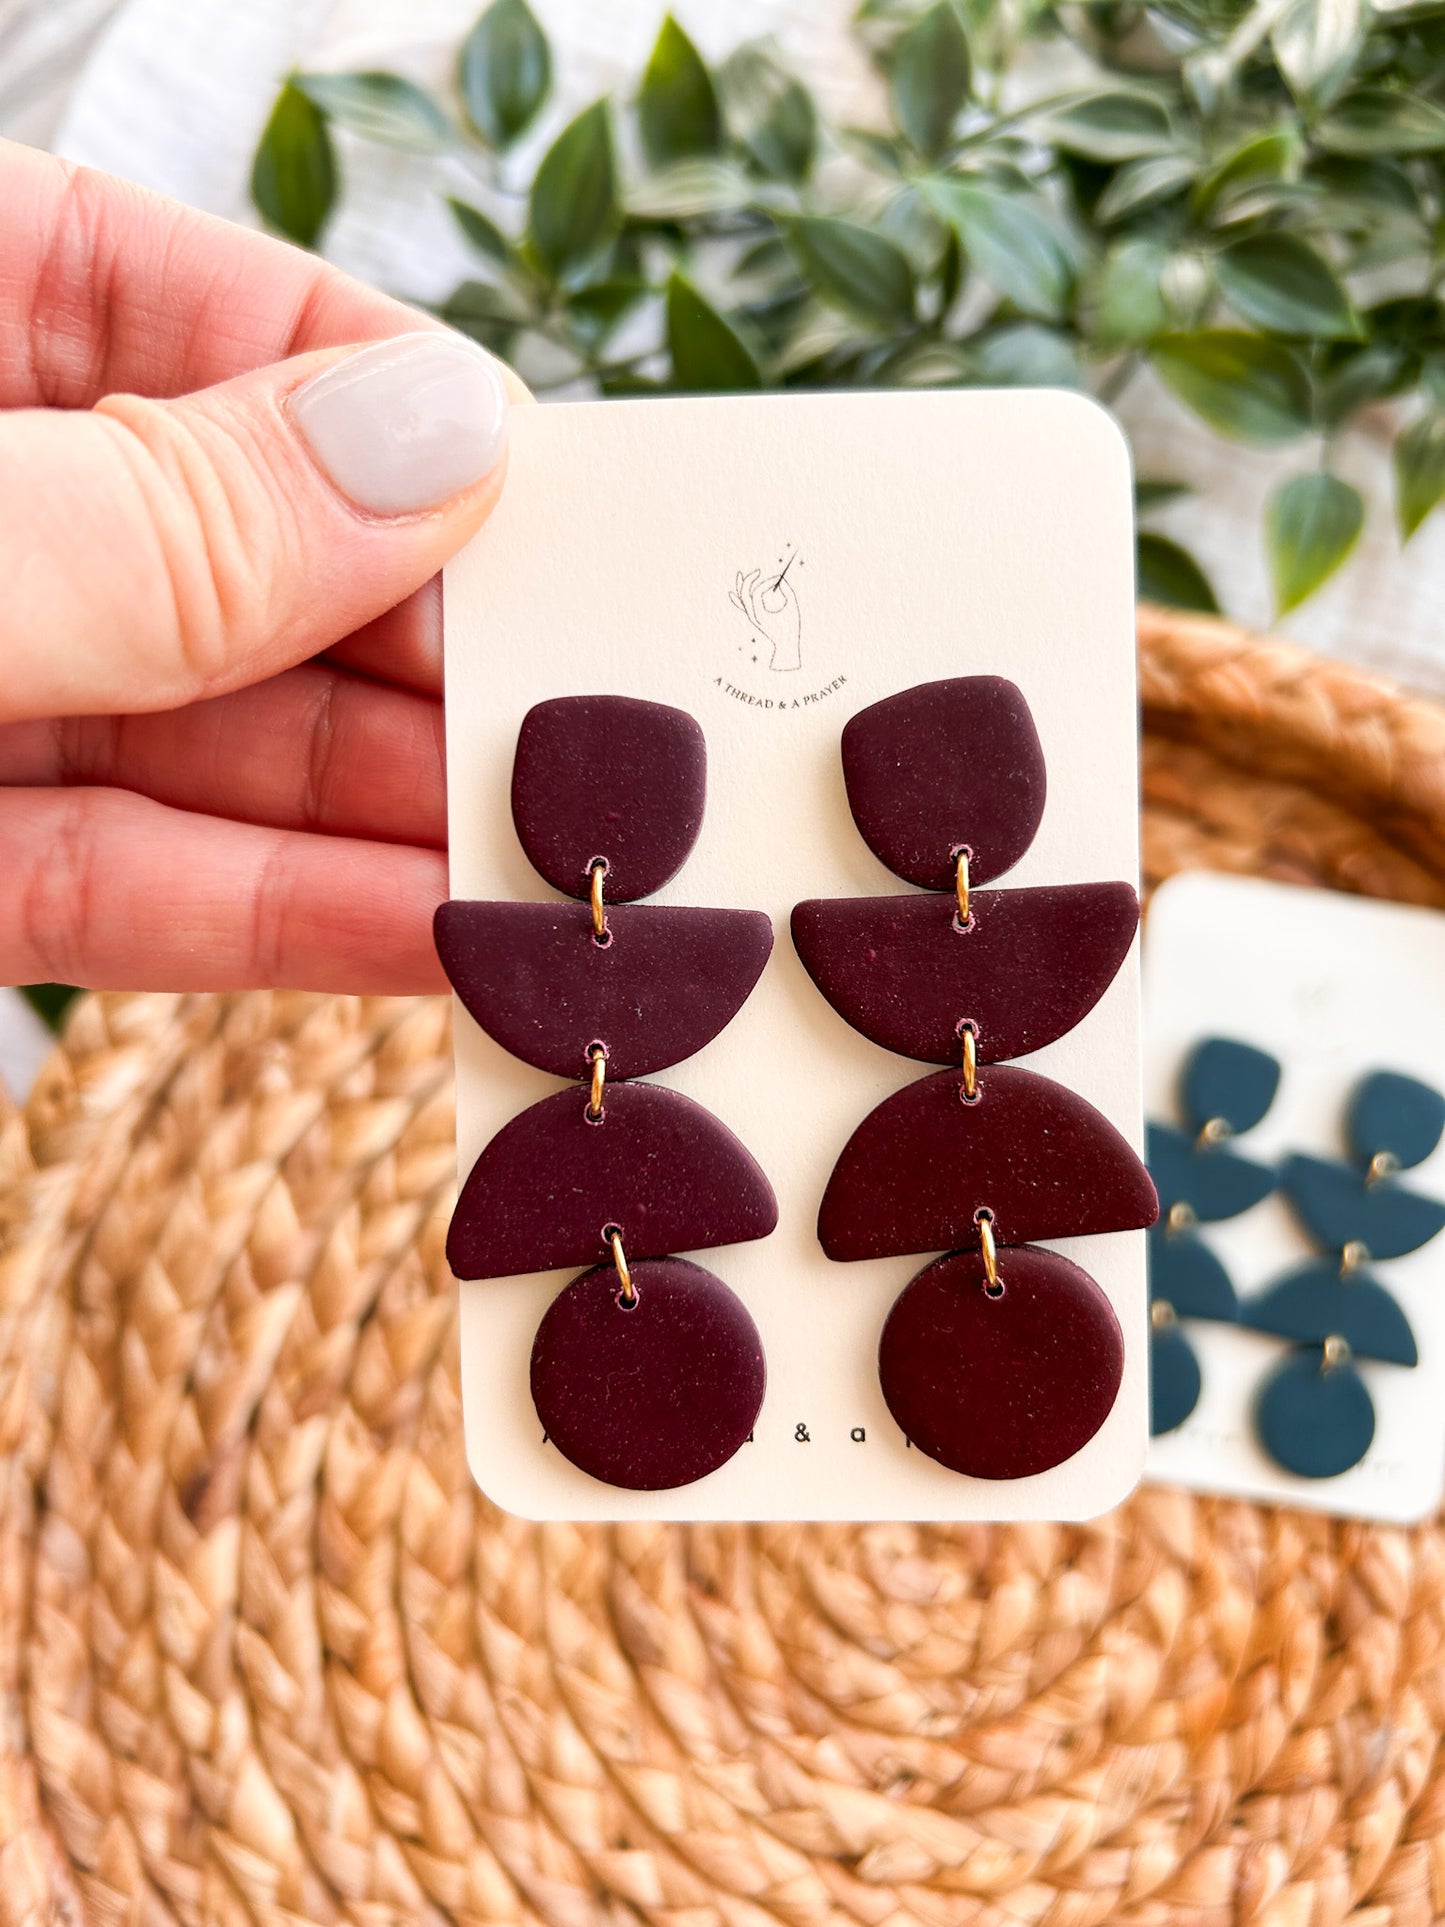 Moody Morning Blue and Wine Colored Clay Earrings | Spring Fashion | Spring Color Earrings | Statement Earrings | Lightweight